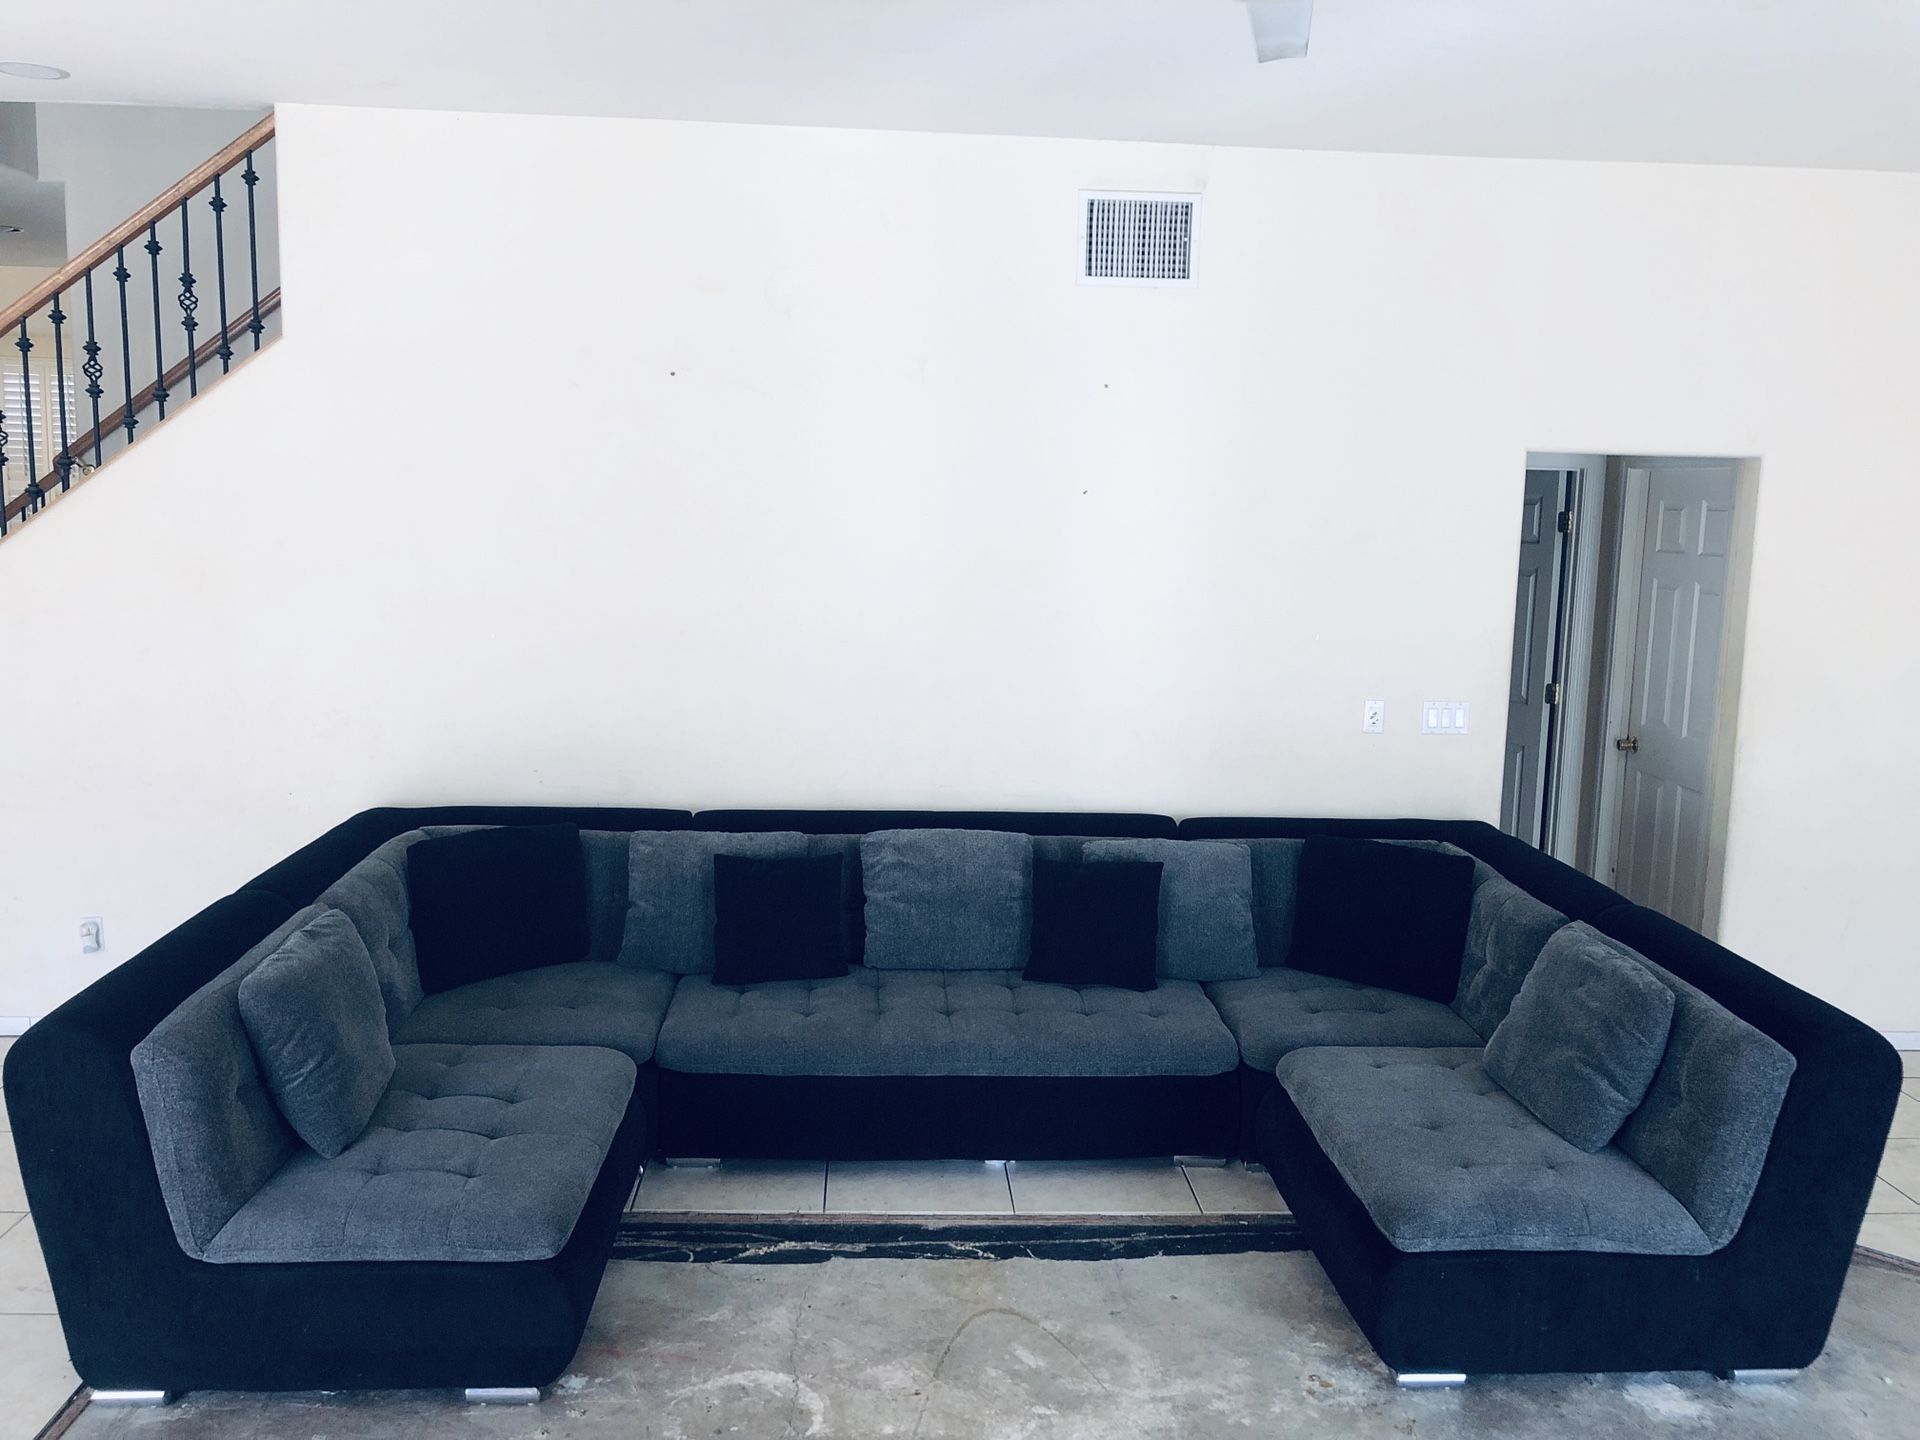 Couch/Sectional 5 piece designer